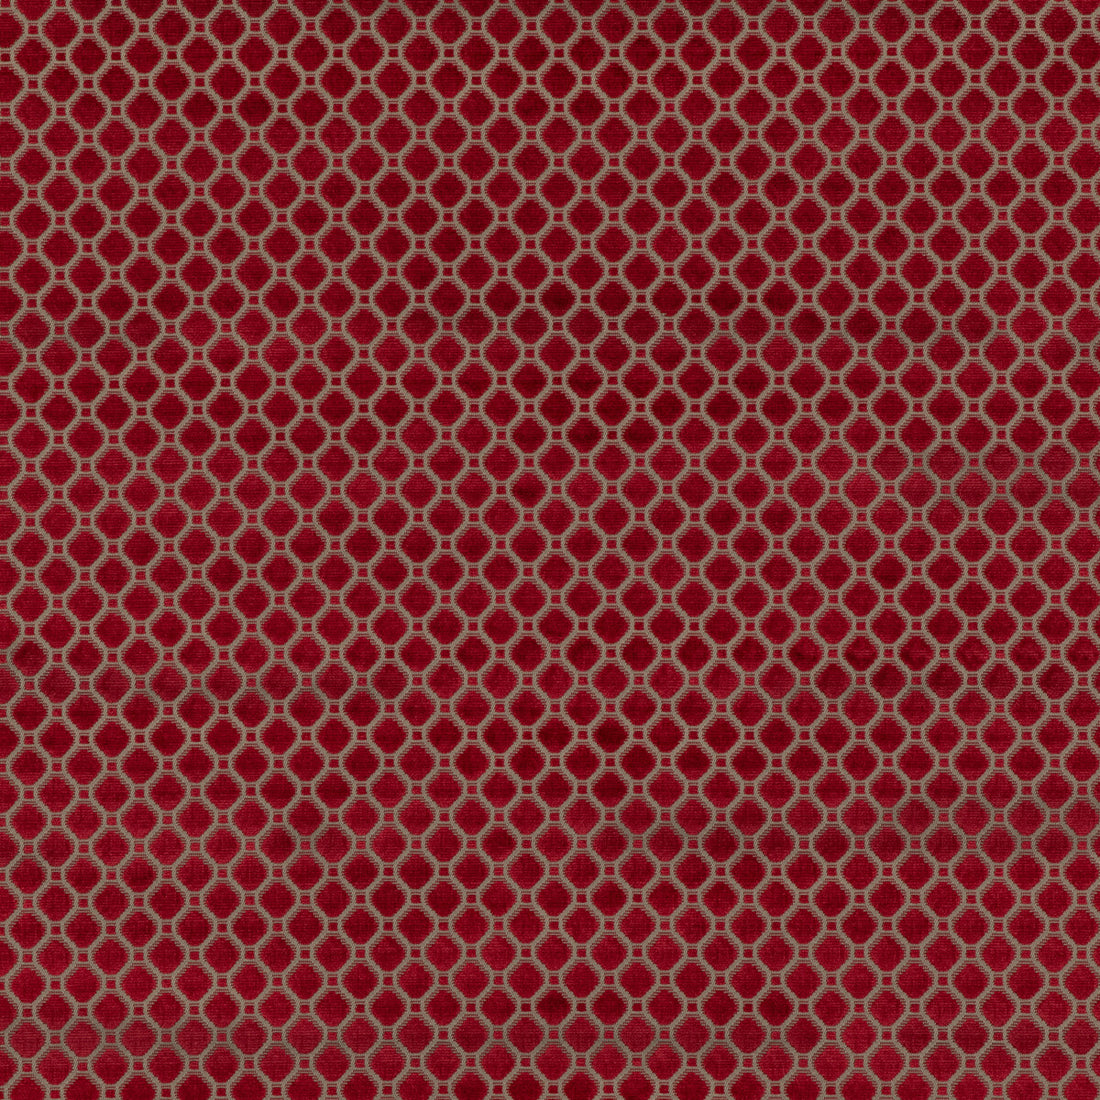 Indus Velvet fabric in red color - pattern BF10826.450.0 - by G P &amp; J Baker in the Coromandel Velvets collection